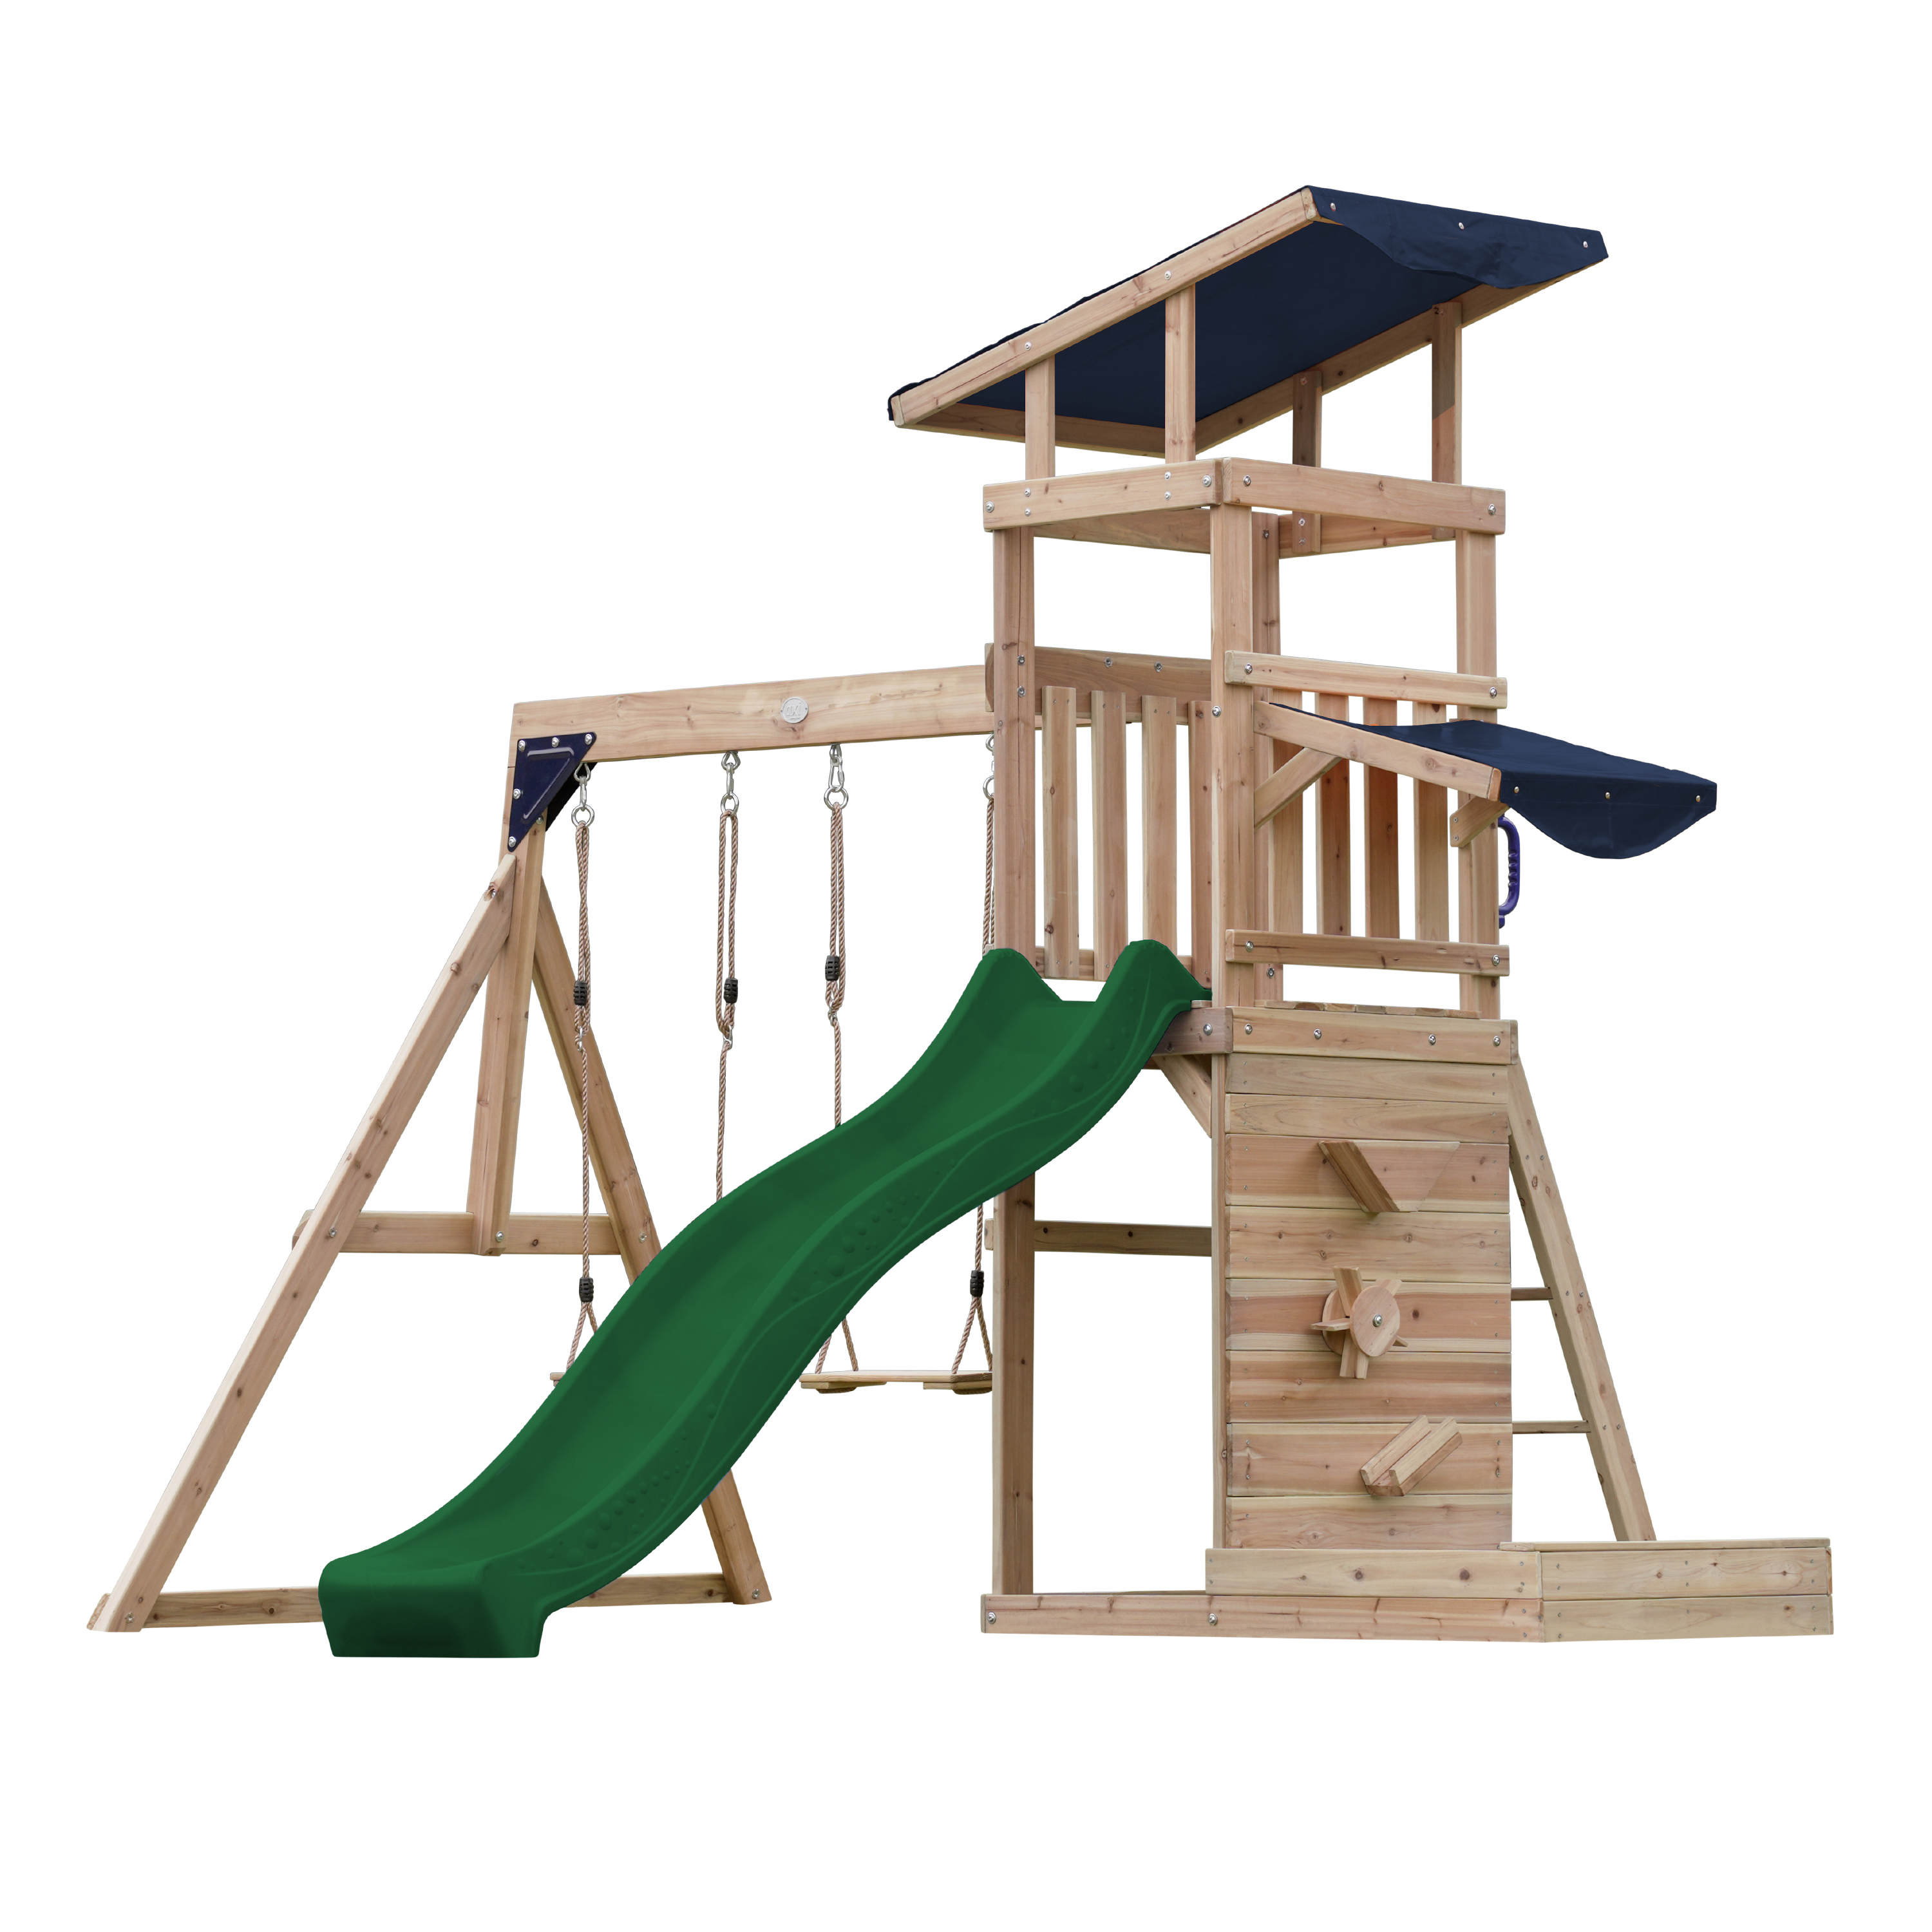 AXI Malik Play Set with Double Swing Brown - Green Slide